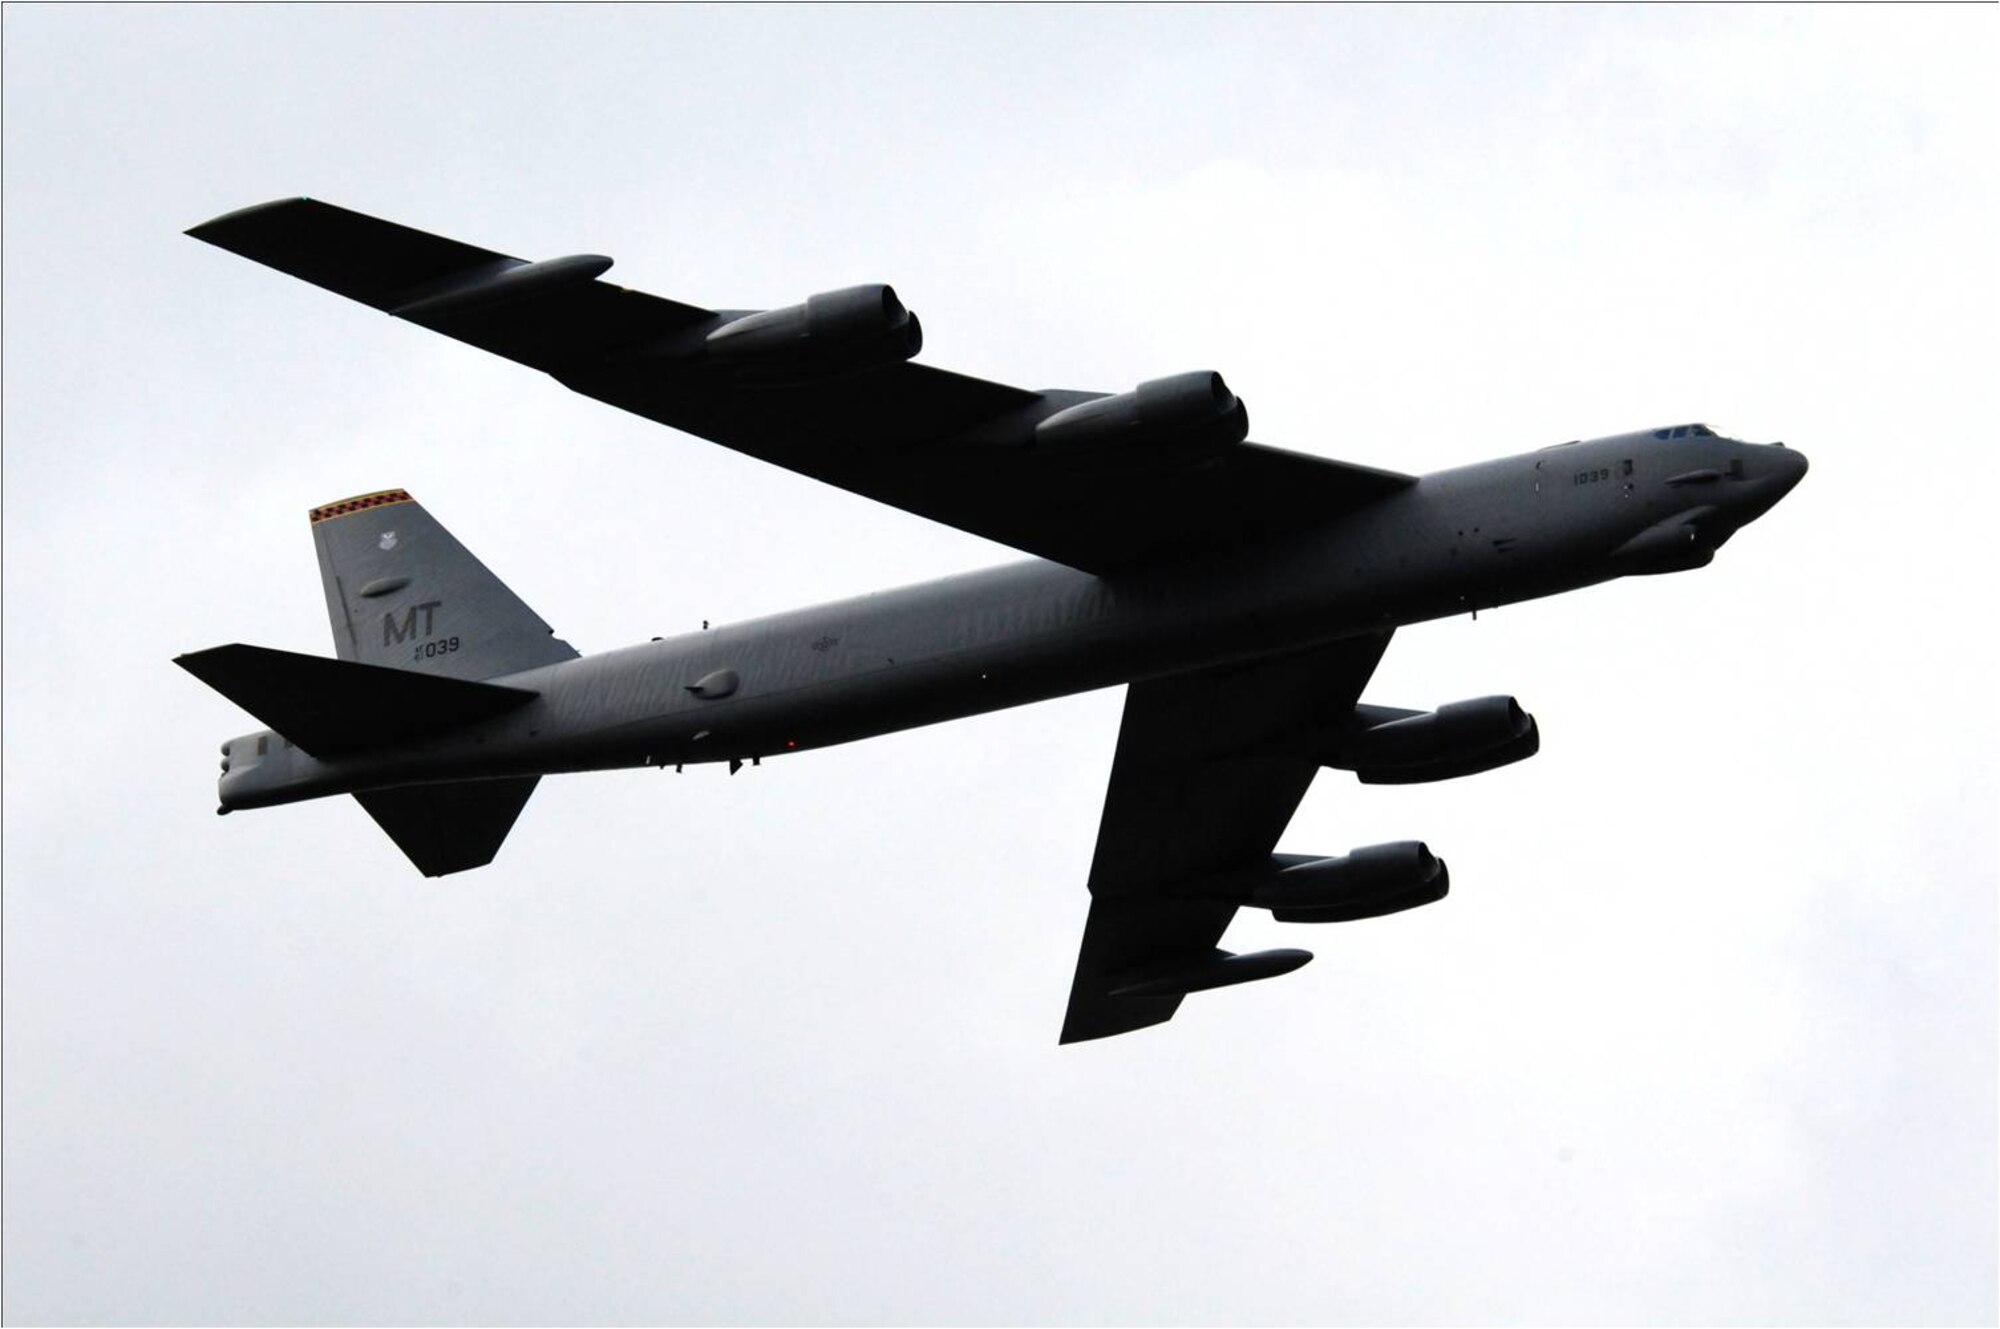 FARNBOROUGH, United Kingdom -- A B-52H Stratofortress from the 5th Bomb Wing, Minot Air Force Base, N.D., performs a flyover at the 2010 Farnborough International Air Show July 22.  The aircraft was one of 11 U.S. military assets either on static display or performing aerial demonstrations for approximately 285,000 spectators at the week-long event. (U.S. Air Force photo by Staff Sgt. Heather M. Norris)